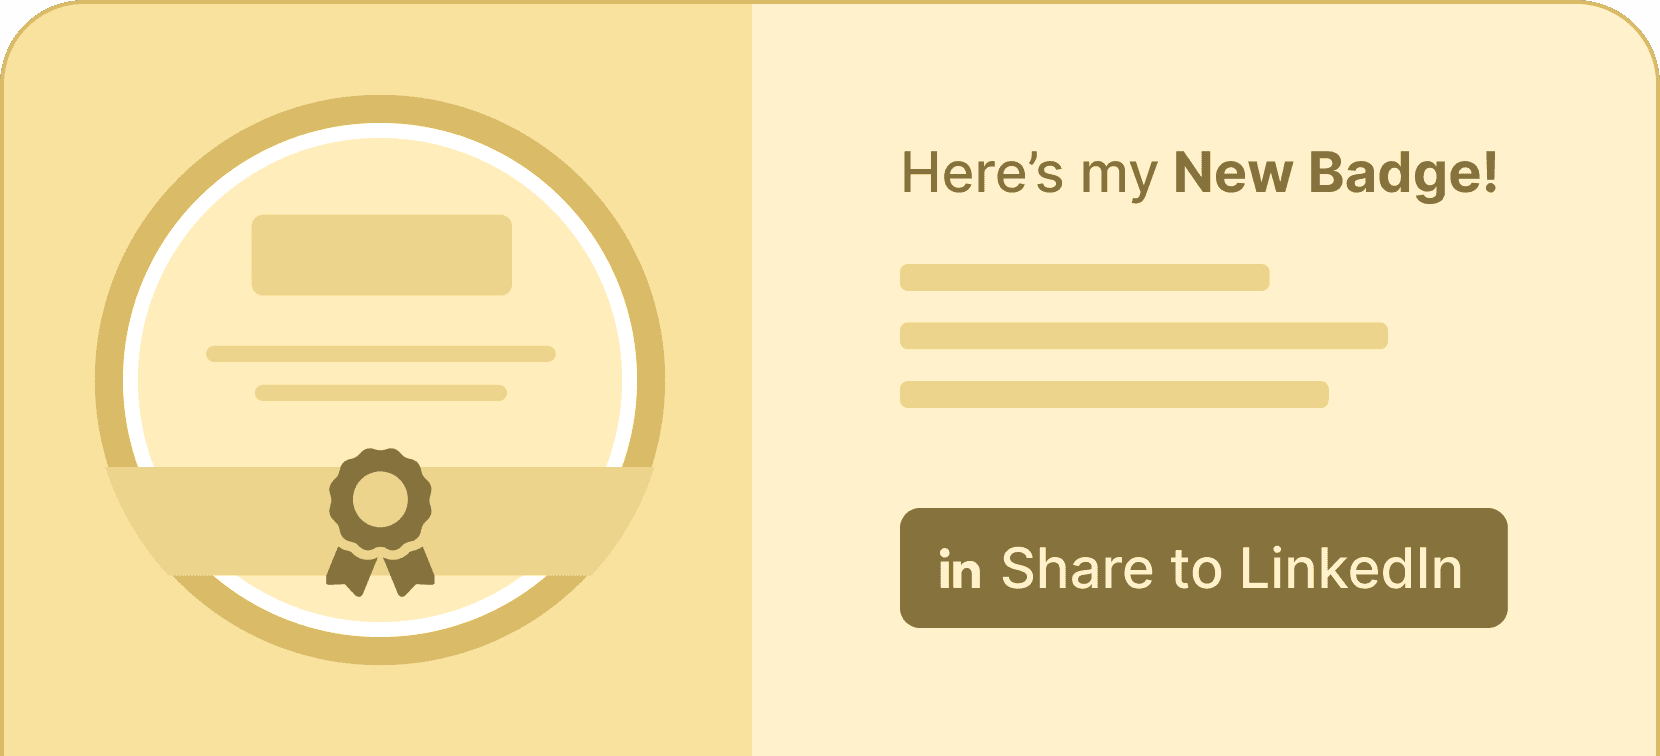 certifier-features-share-badge-on-linkedin